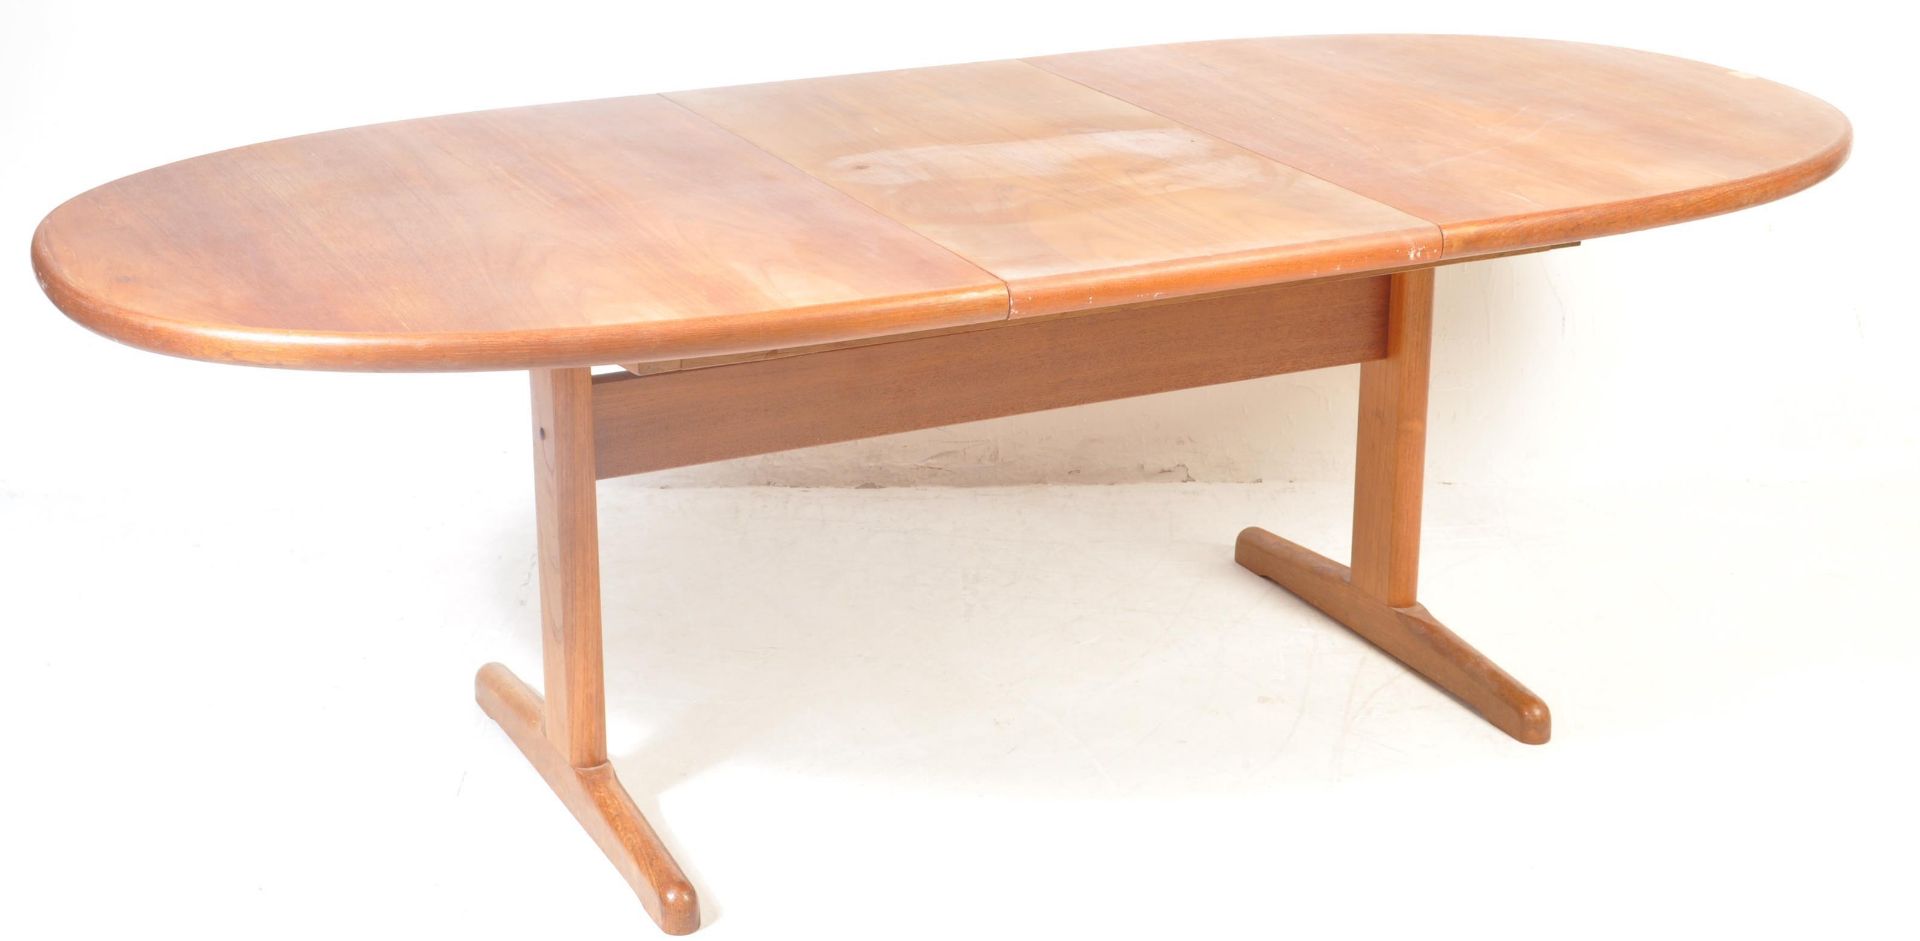 RETRO VINTAGE MID 20TH CENTURY DANISH EXTENDABLE DINING TABLE - Image 2 of 4